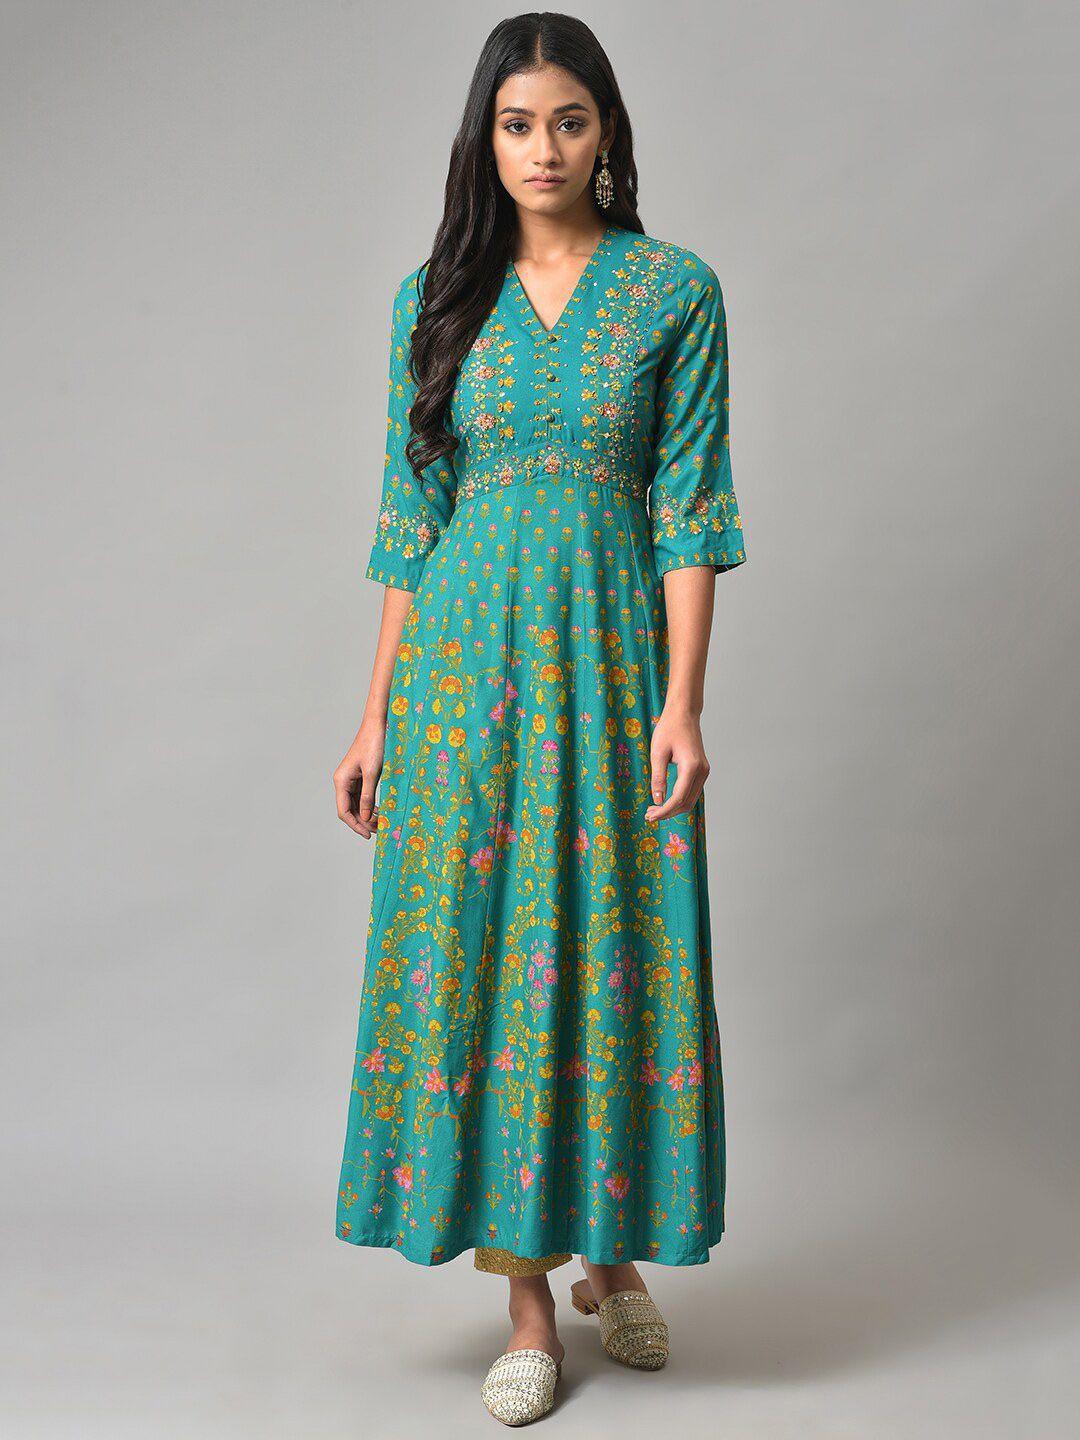 w green floral printed ethnic maxi dress